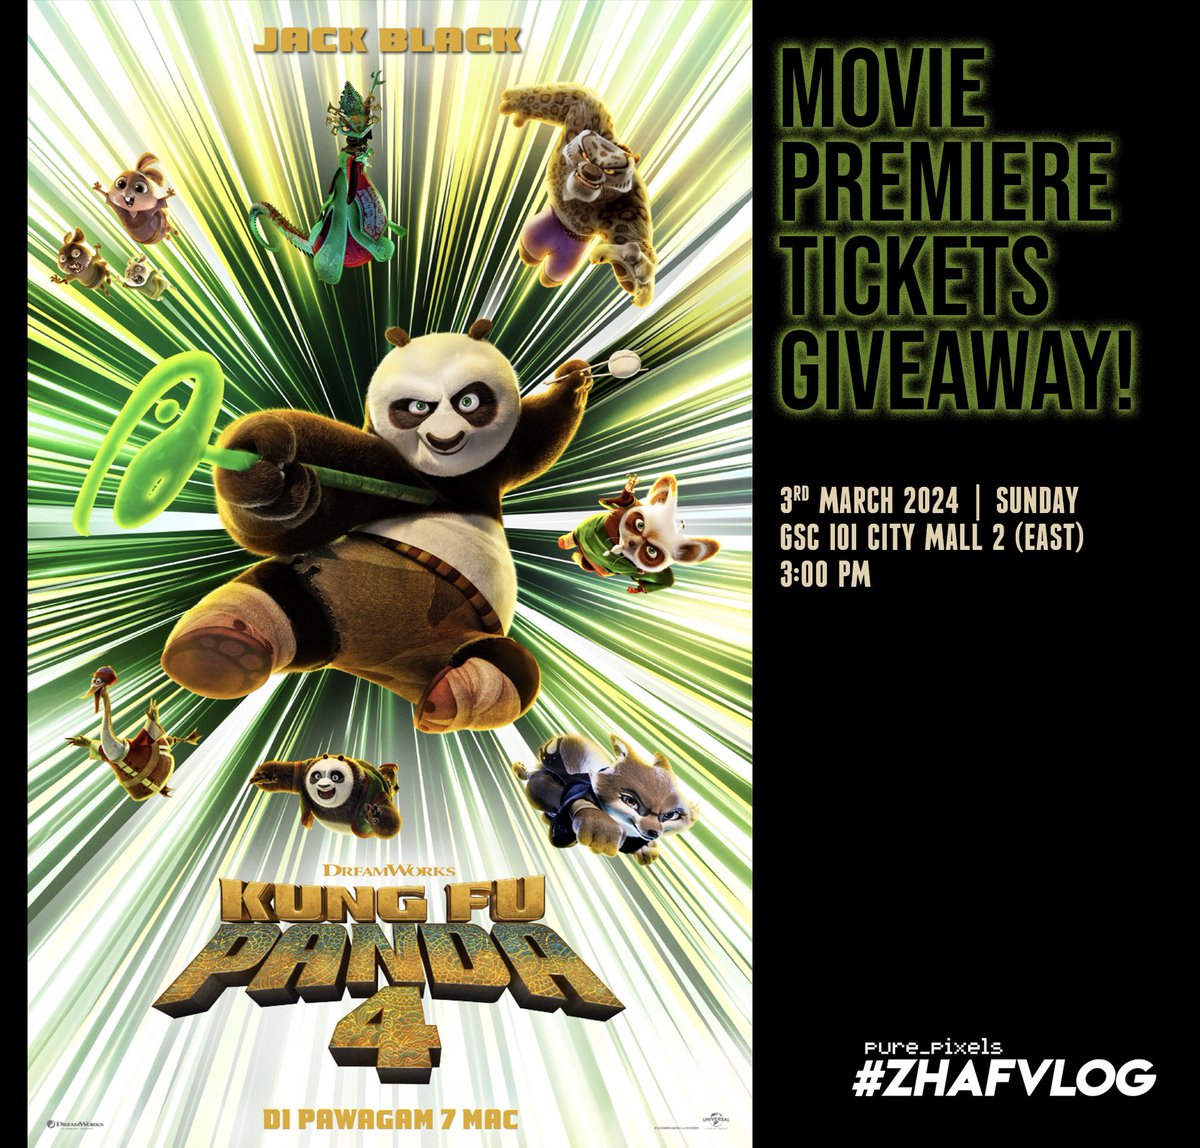 KUNGFU PANDA 4 Movie Premiere Tickets Giveaway! forms.gle/7JGN3ErF6fY32p… #ZHAFVLOG #MulutPuakaGiveaway #MulutPuakaPremiere #KungfuPanda4MY